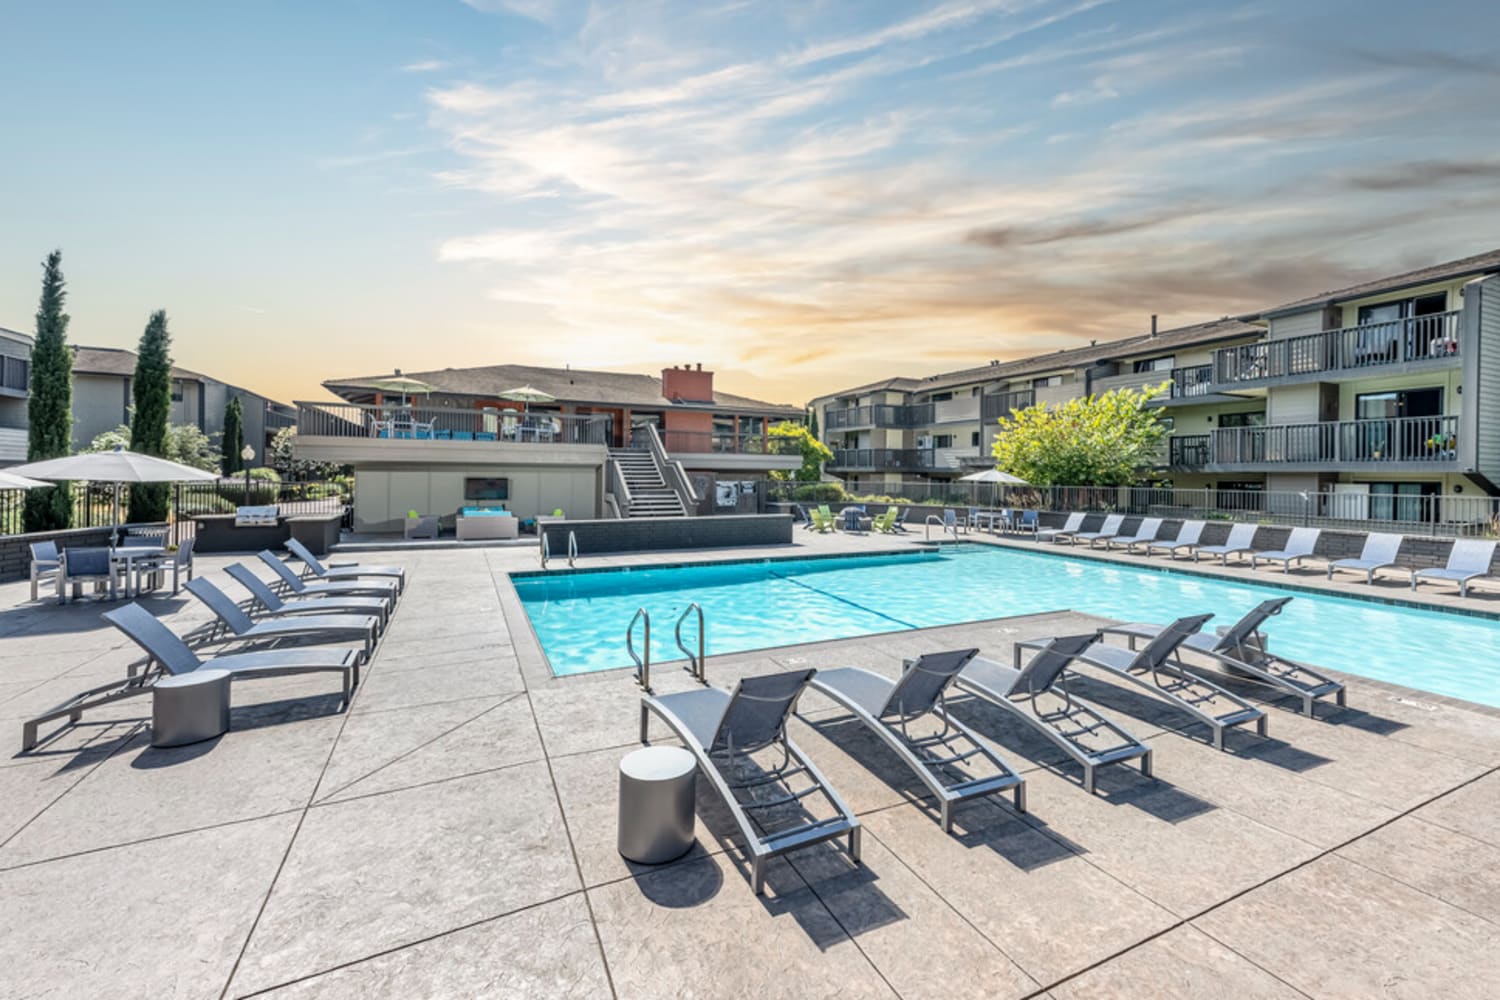 Harbor Cove Apartments offer a swimming pool in Foster City, California